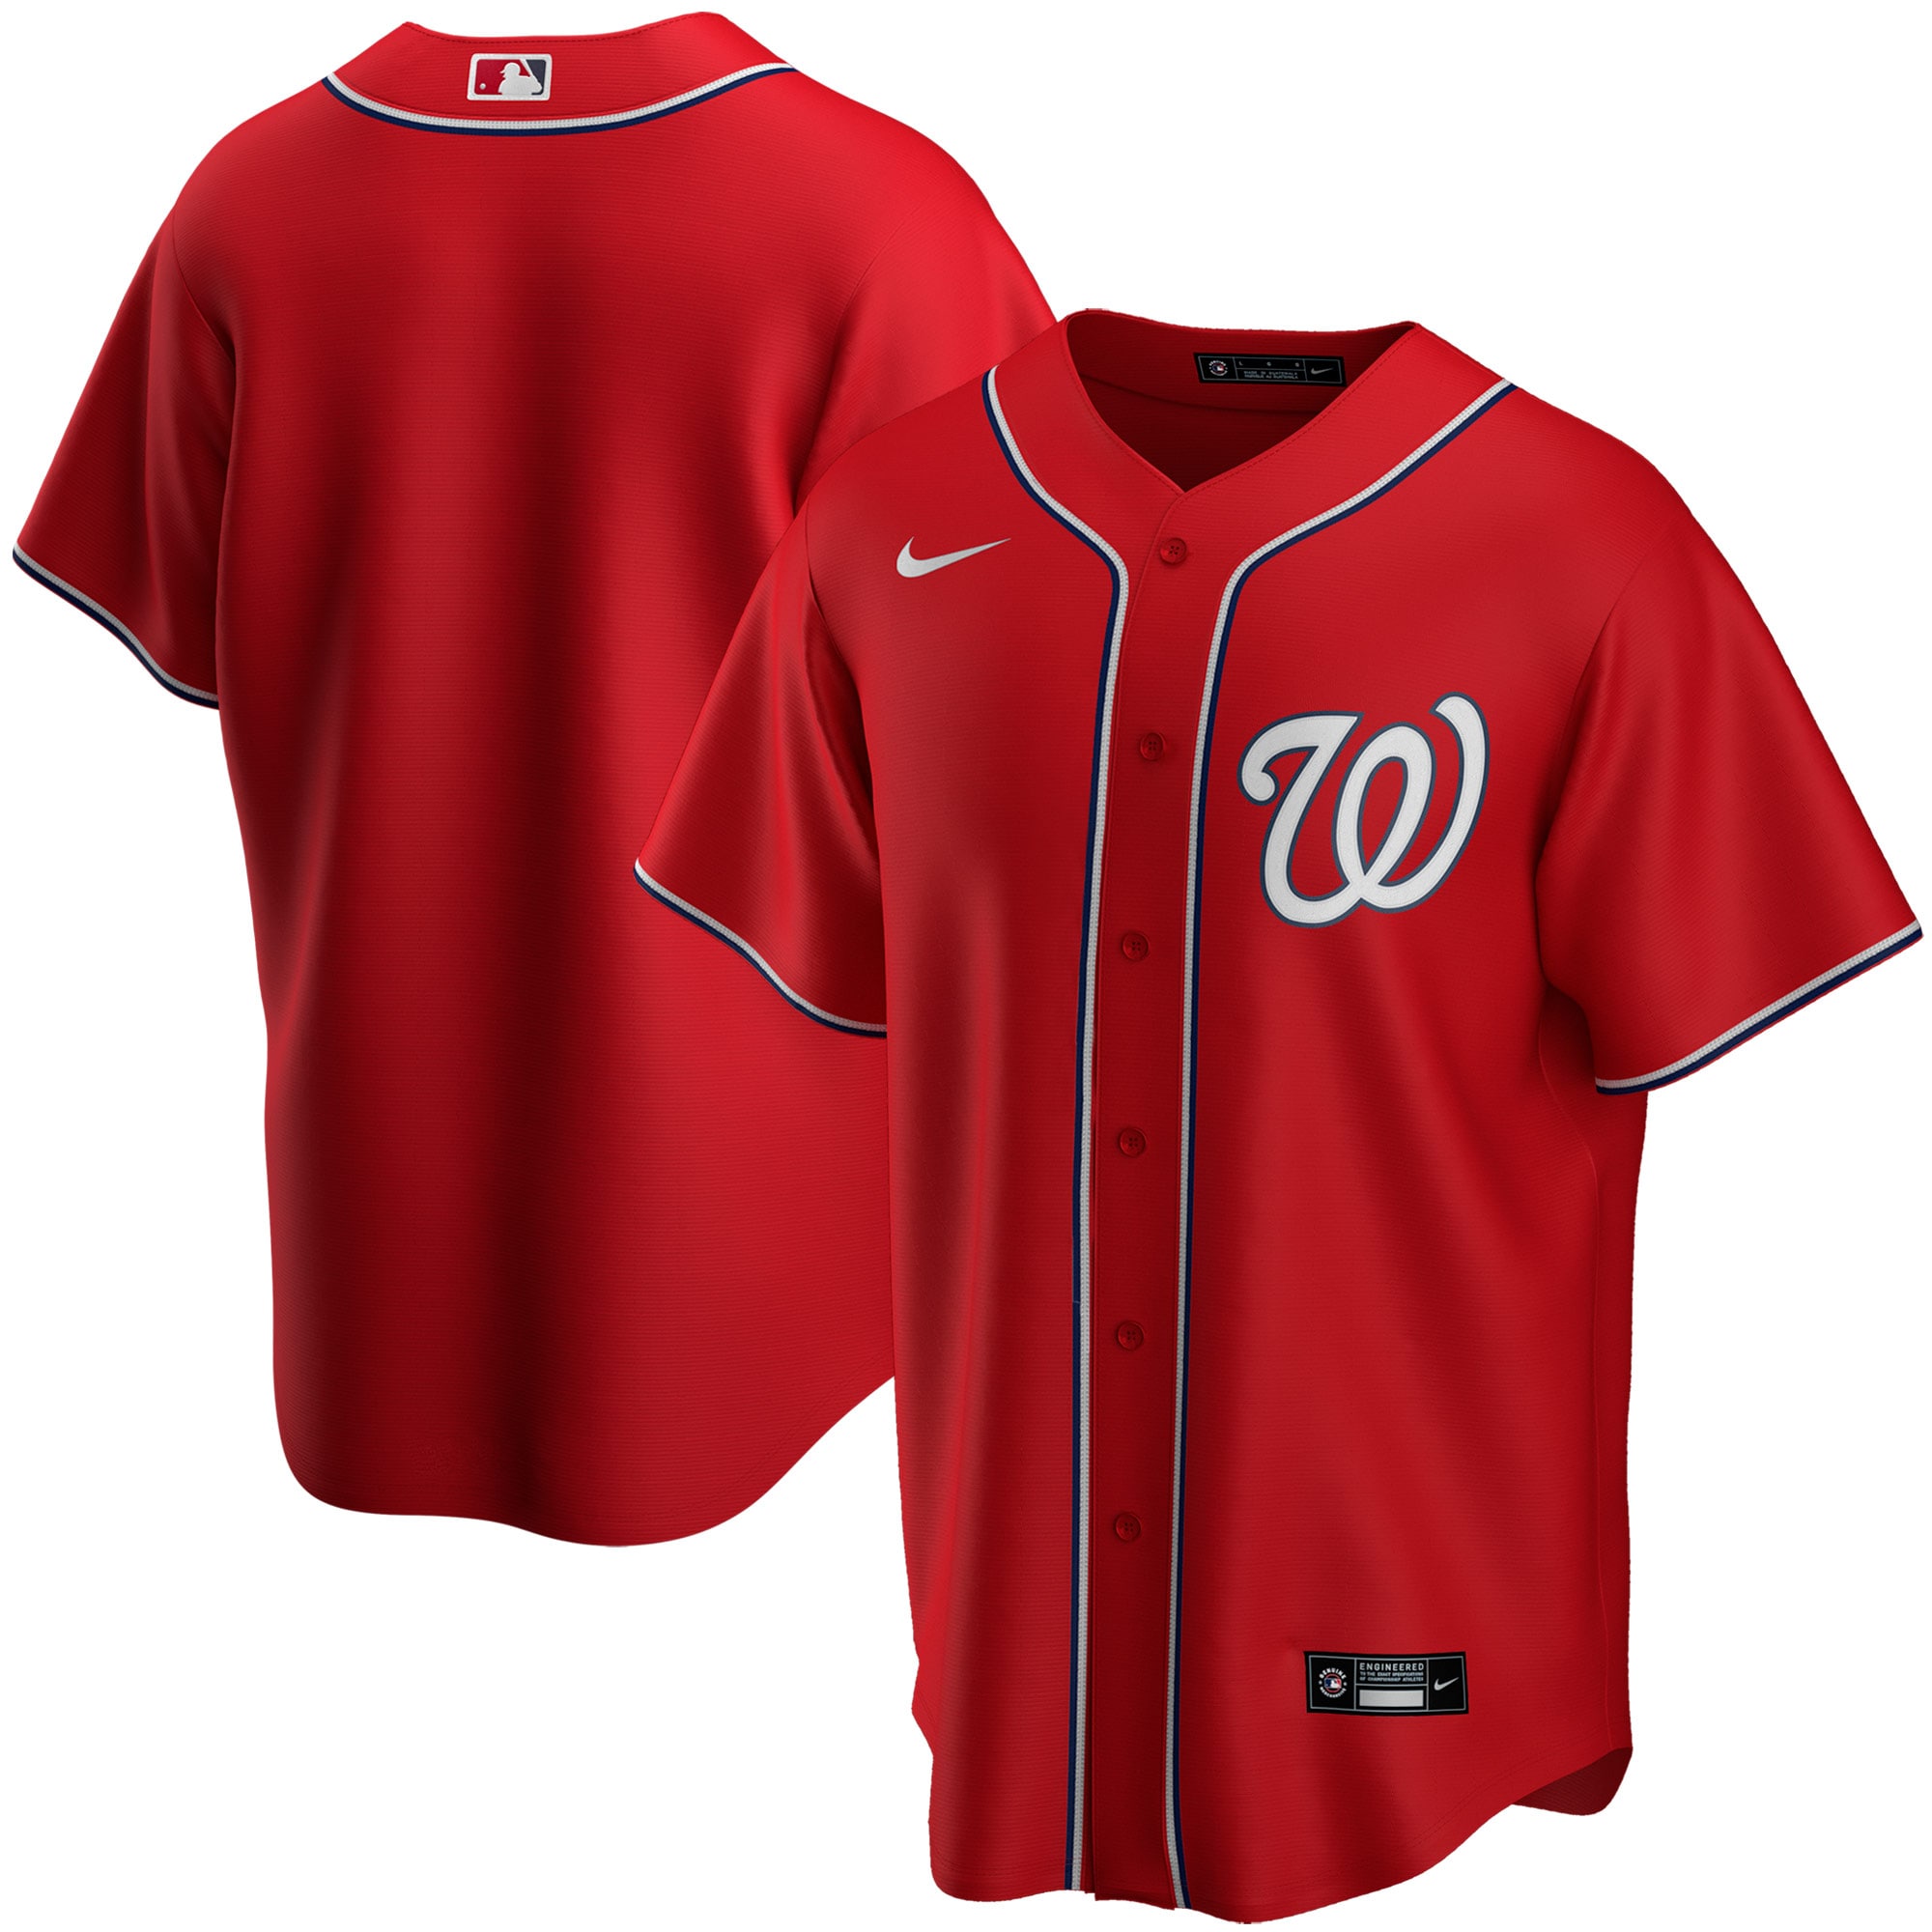 Youth Washington Nationals Red Alternate Team Jersey